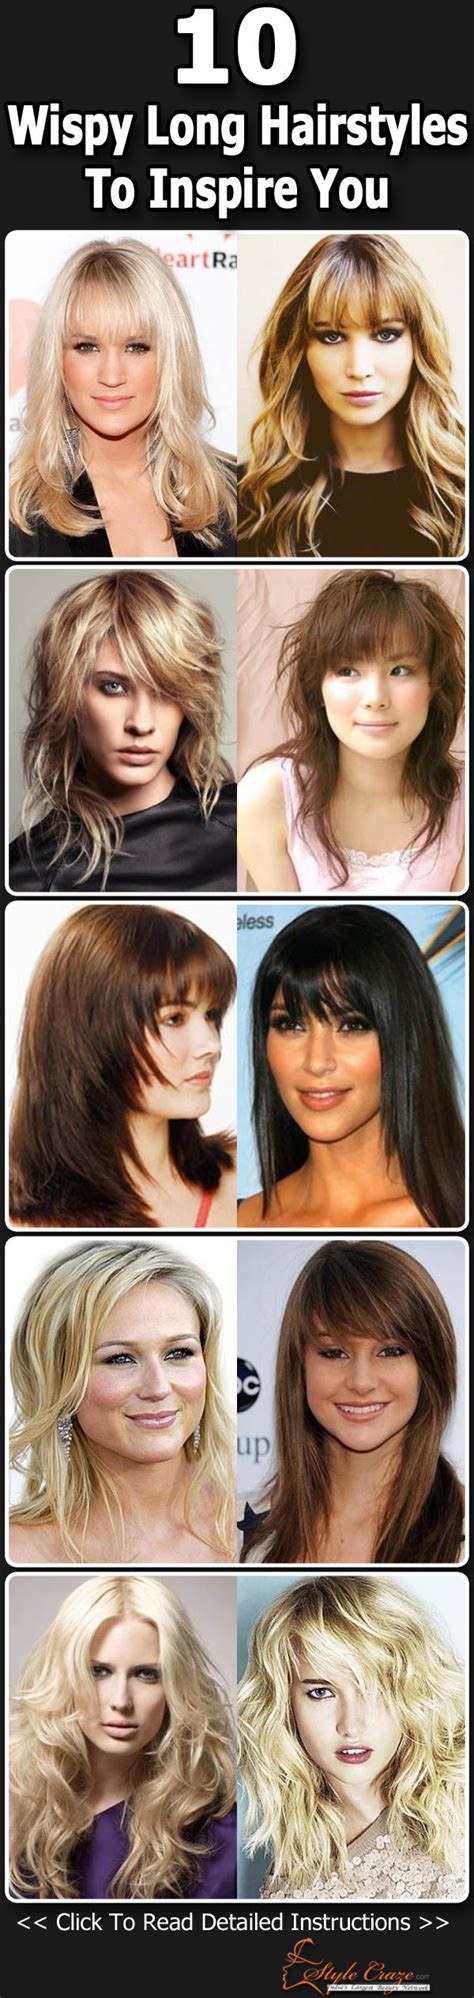 10 Wispy Long Hairstyles To Inspire You Long Hair Styles Pretty